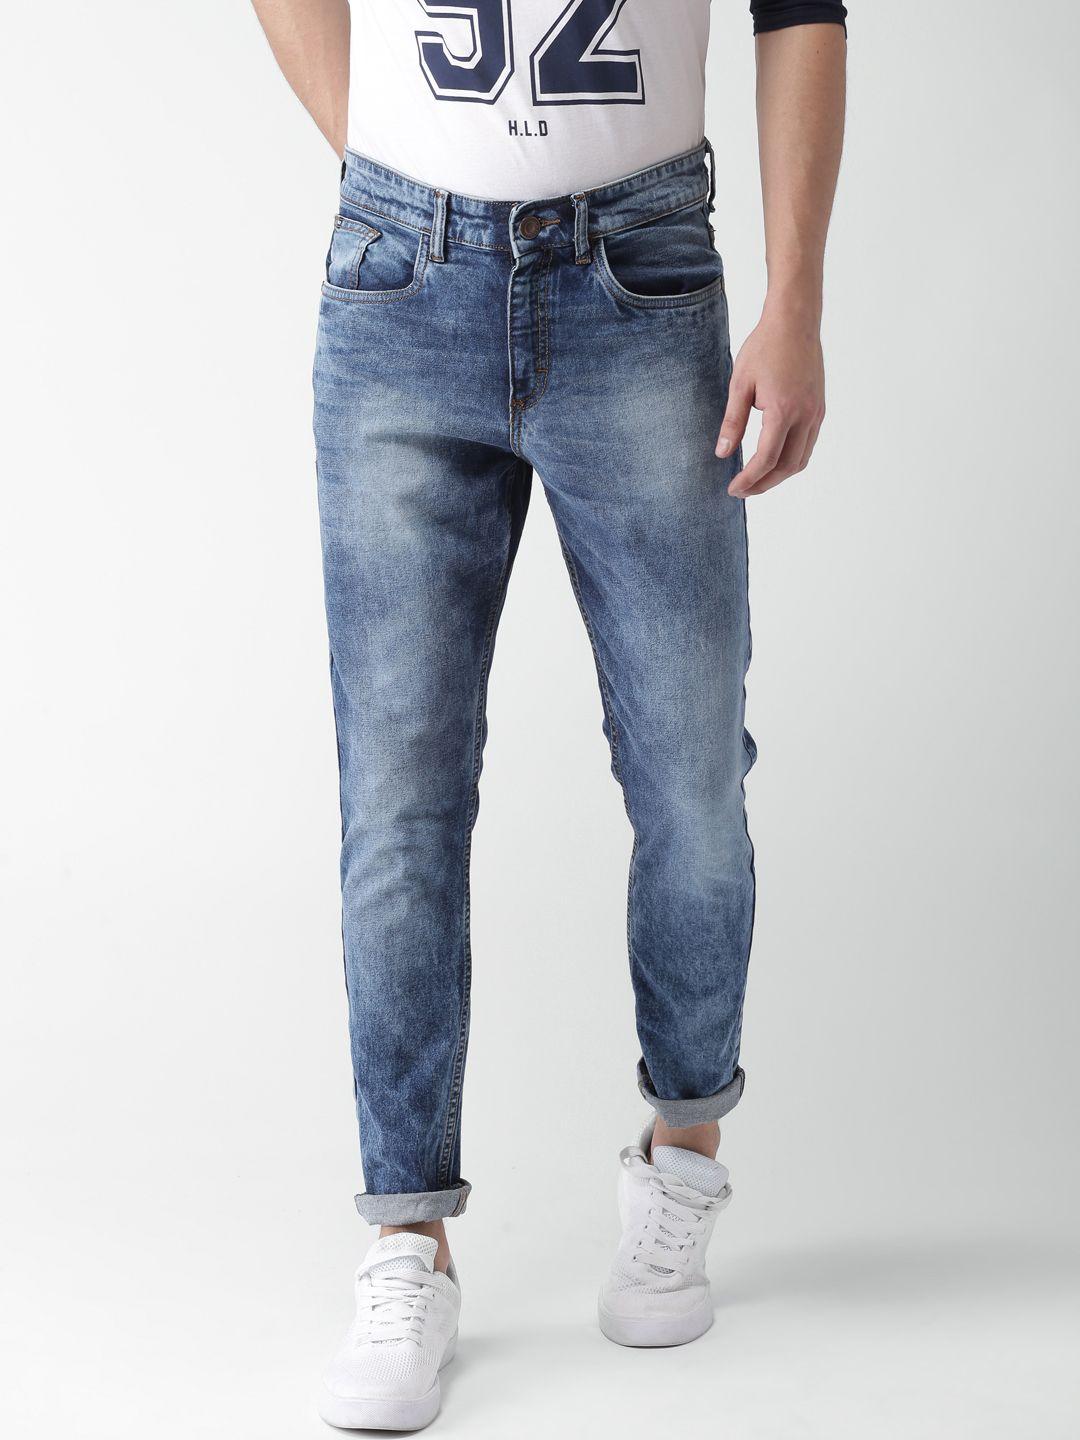 highlander-men-blue-tapered-fit-mid-rise-clean-look-stretchable-cropped-jeans